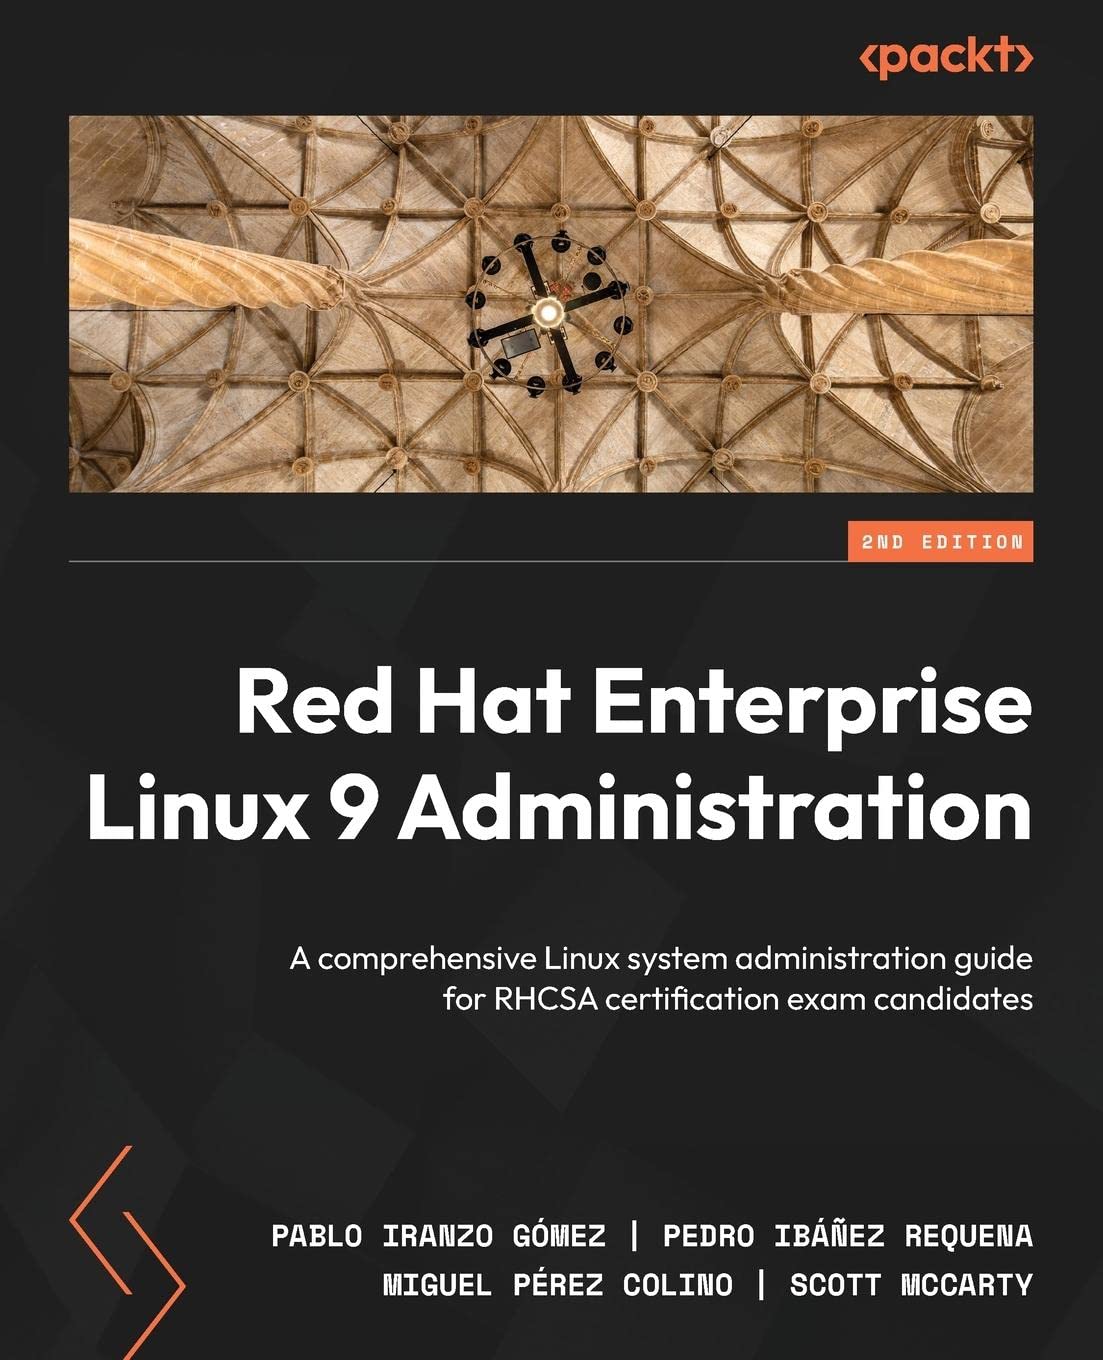 Red Hat Enterprise Linux 9 Administration: A comprehensive Linux system administration guide for RHCSA certification exam candidates, 2nd Edition